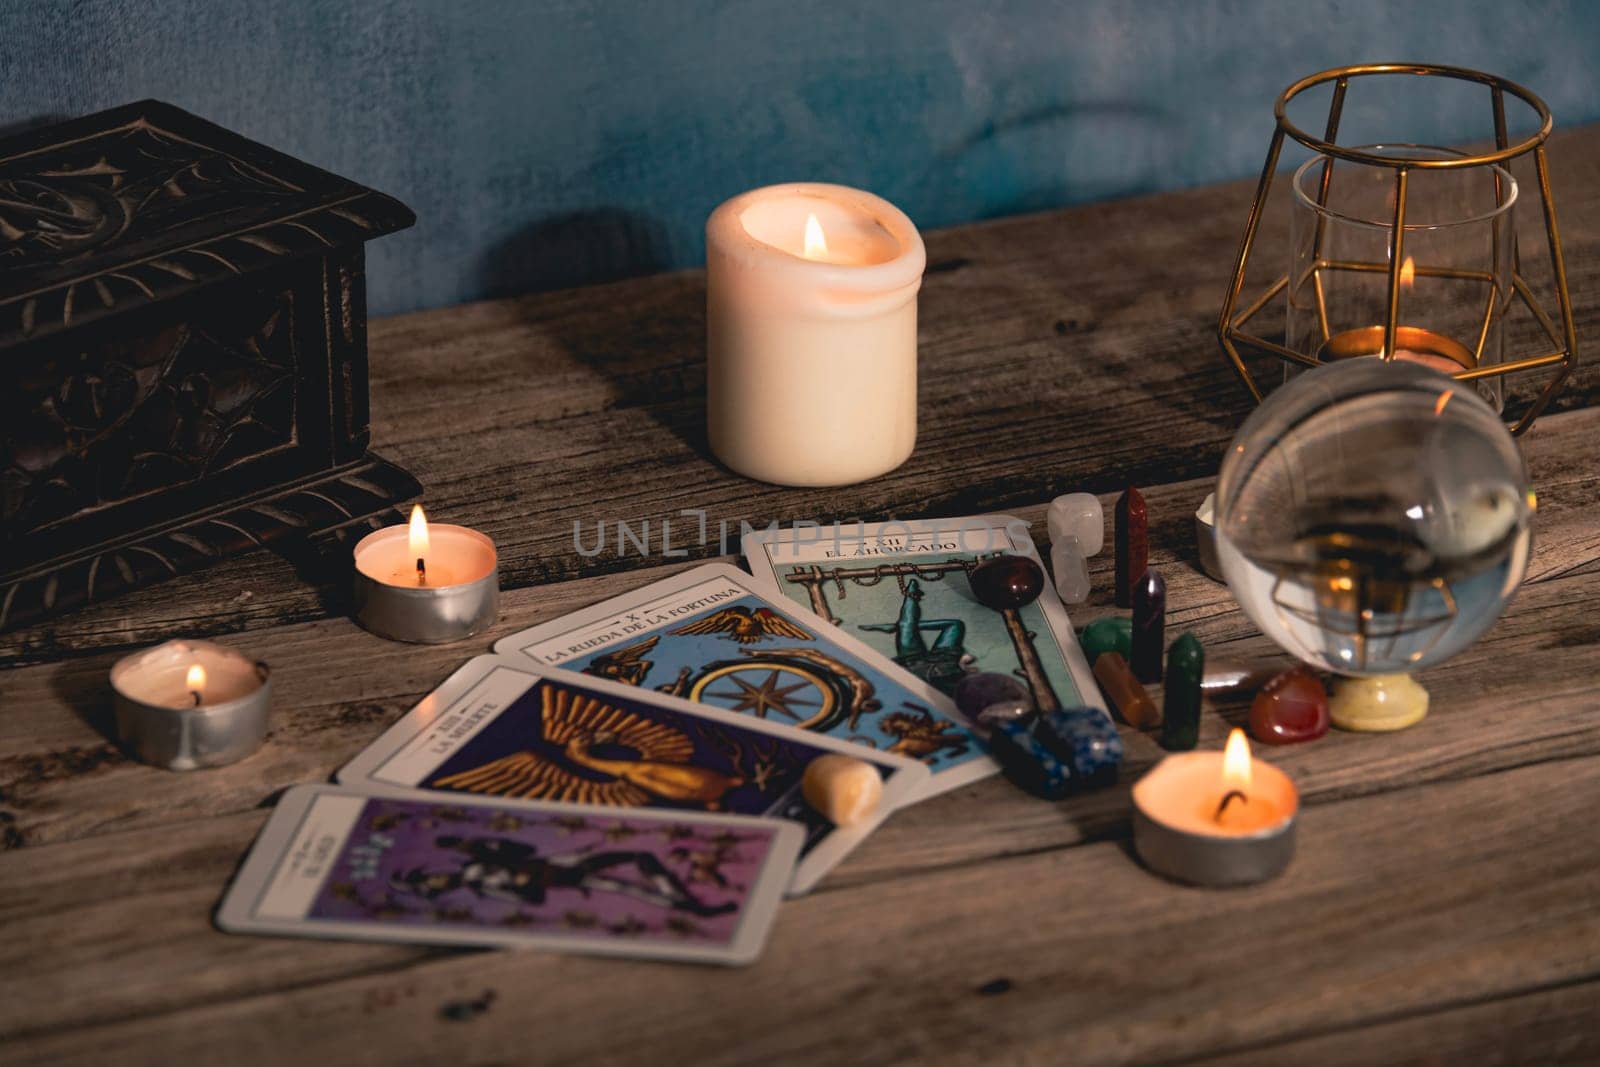 Close-up of a tarot card arrangement with a crystal ball and flickering candles on an aged wooden surface